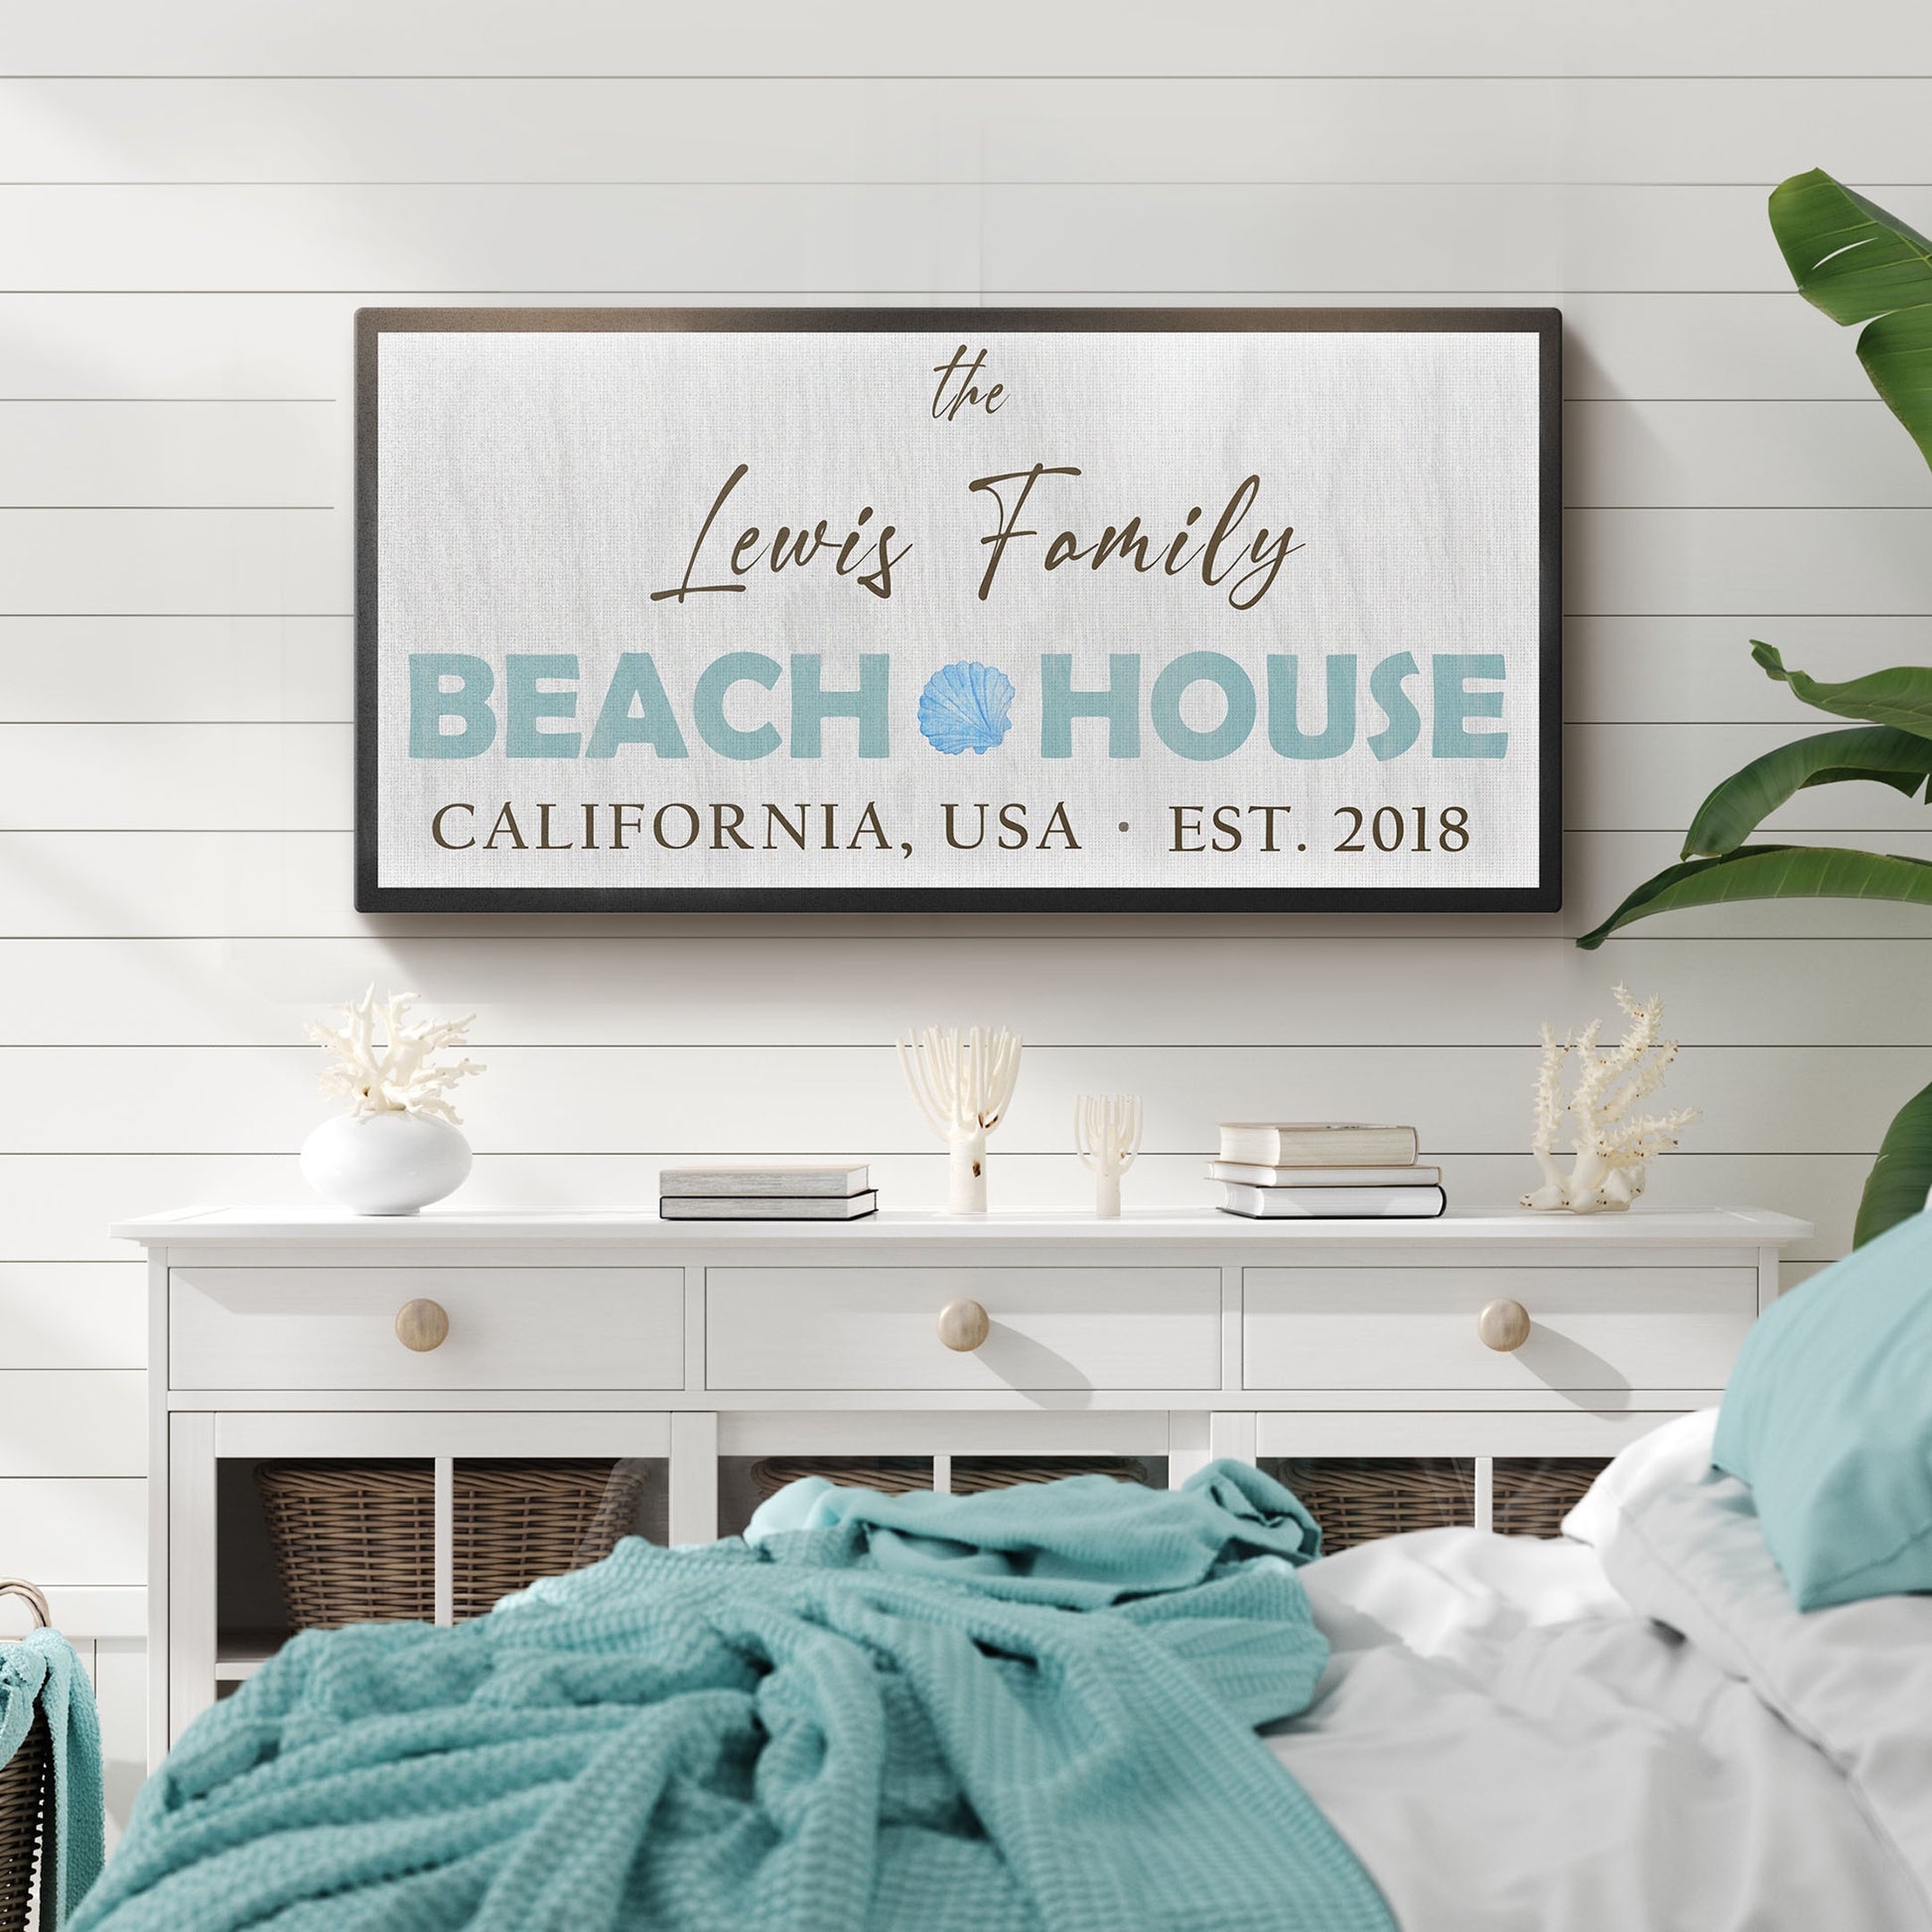 Beach House Sign - Image by Tailored Canvases